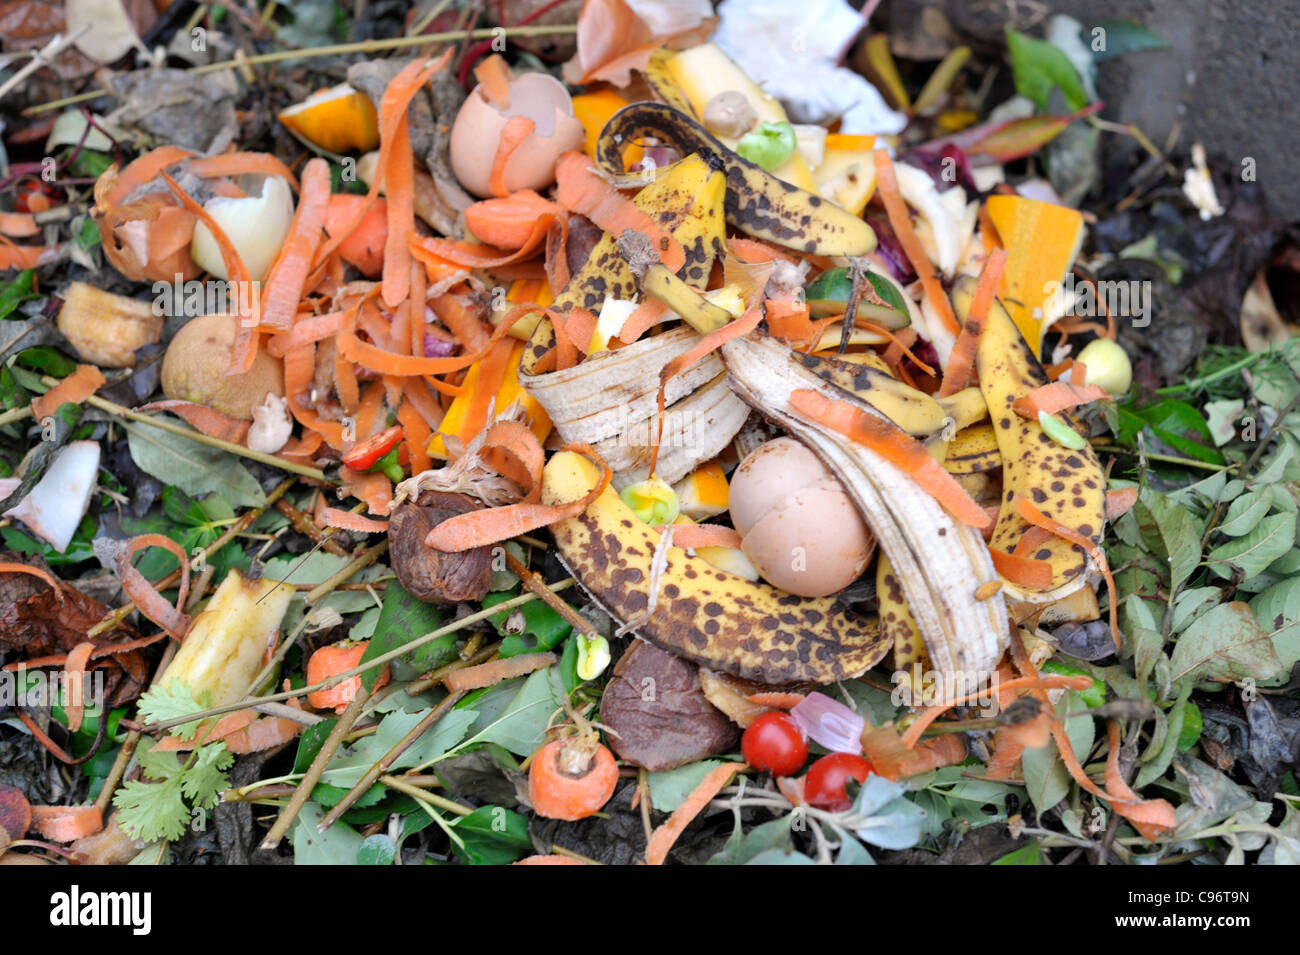 Garden Compost Heap With Plant Material And Kitchen Waste Stock